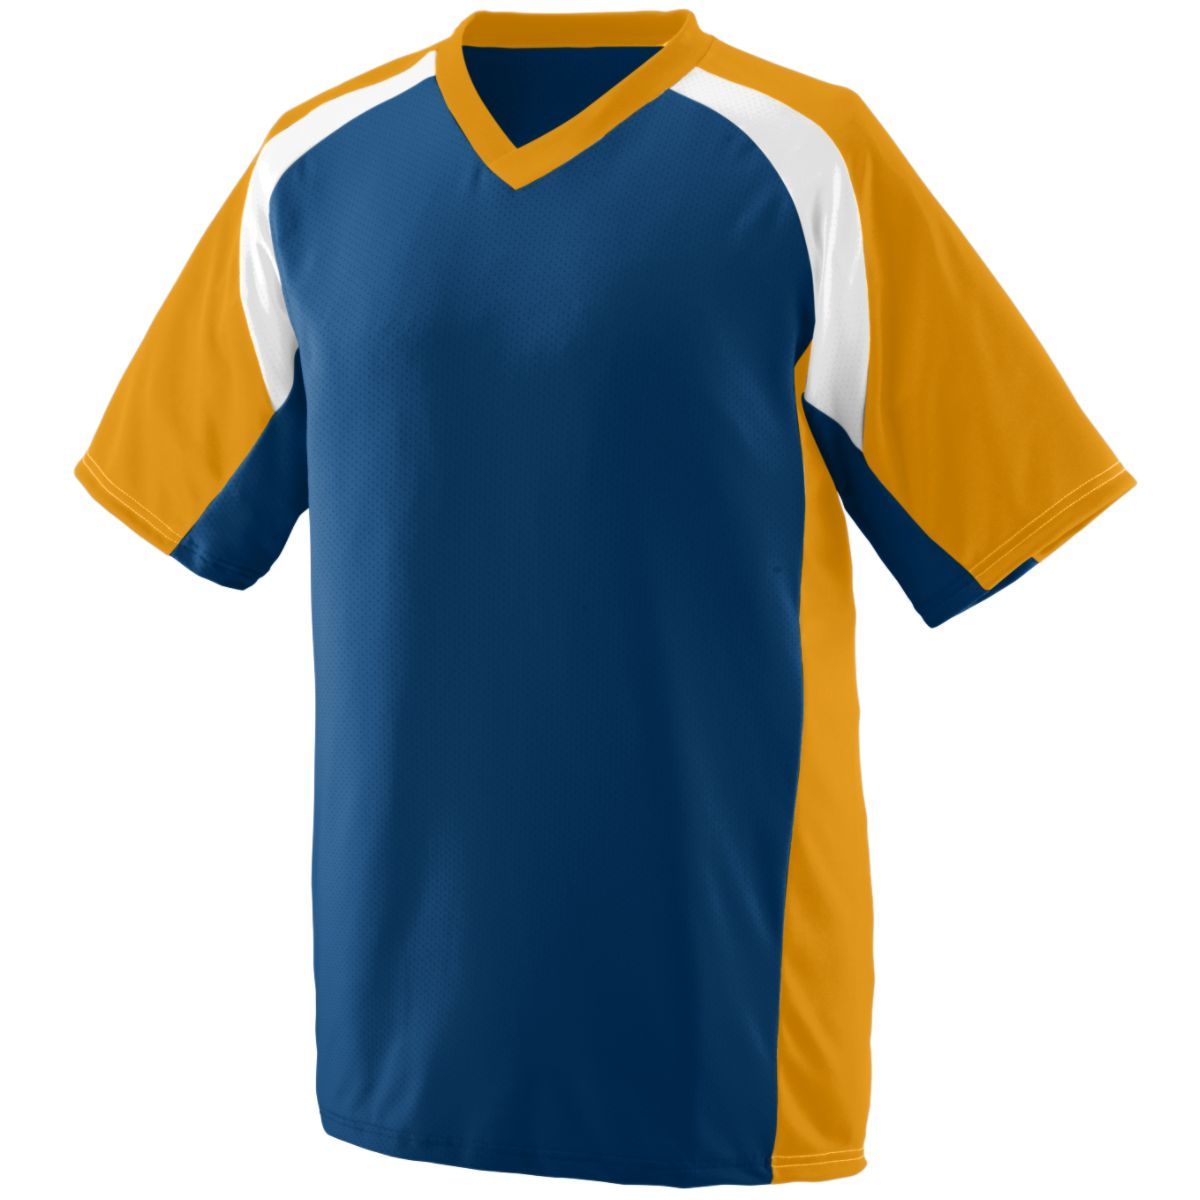 Augusta Sportswear Youth Nitro Jersey in Navy/Gold/White  -Part of the Youth, Youth-Jersey, Augusta-Products, Football, Shirts, All-Sports, All-Sports-1 product lines at KanaleyCreations.com